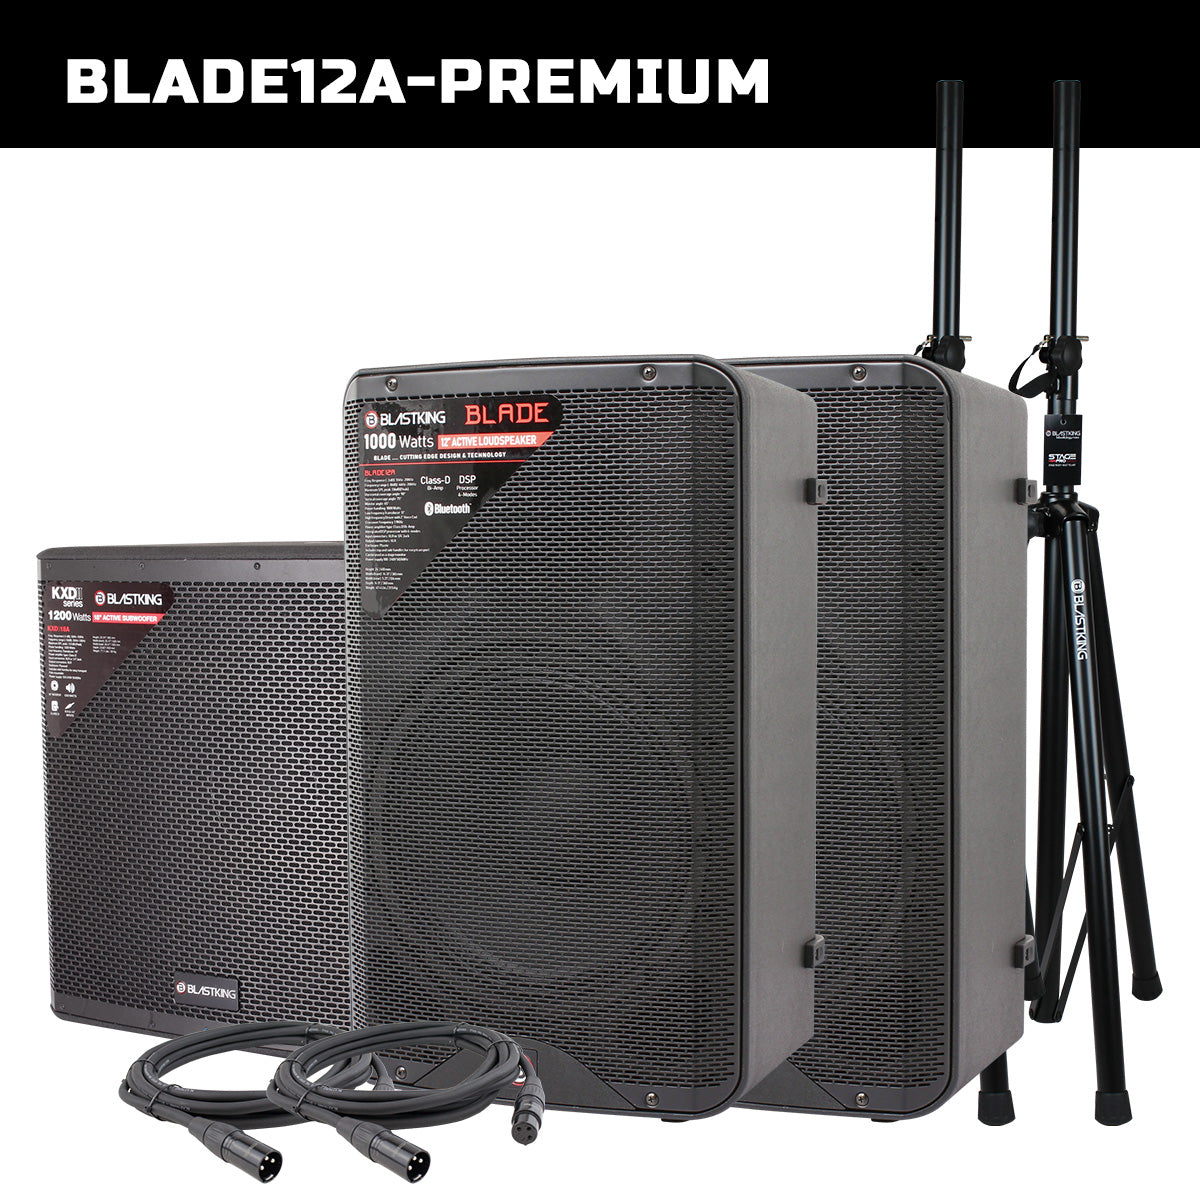 Blastking BLADE12A-PREMIUM (2) 12” Active Loudspeakers 1000 Watts Class-D (1) 18 inch Active Subwoofer with Stands and Cables